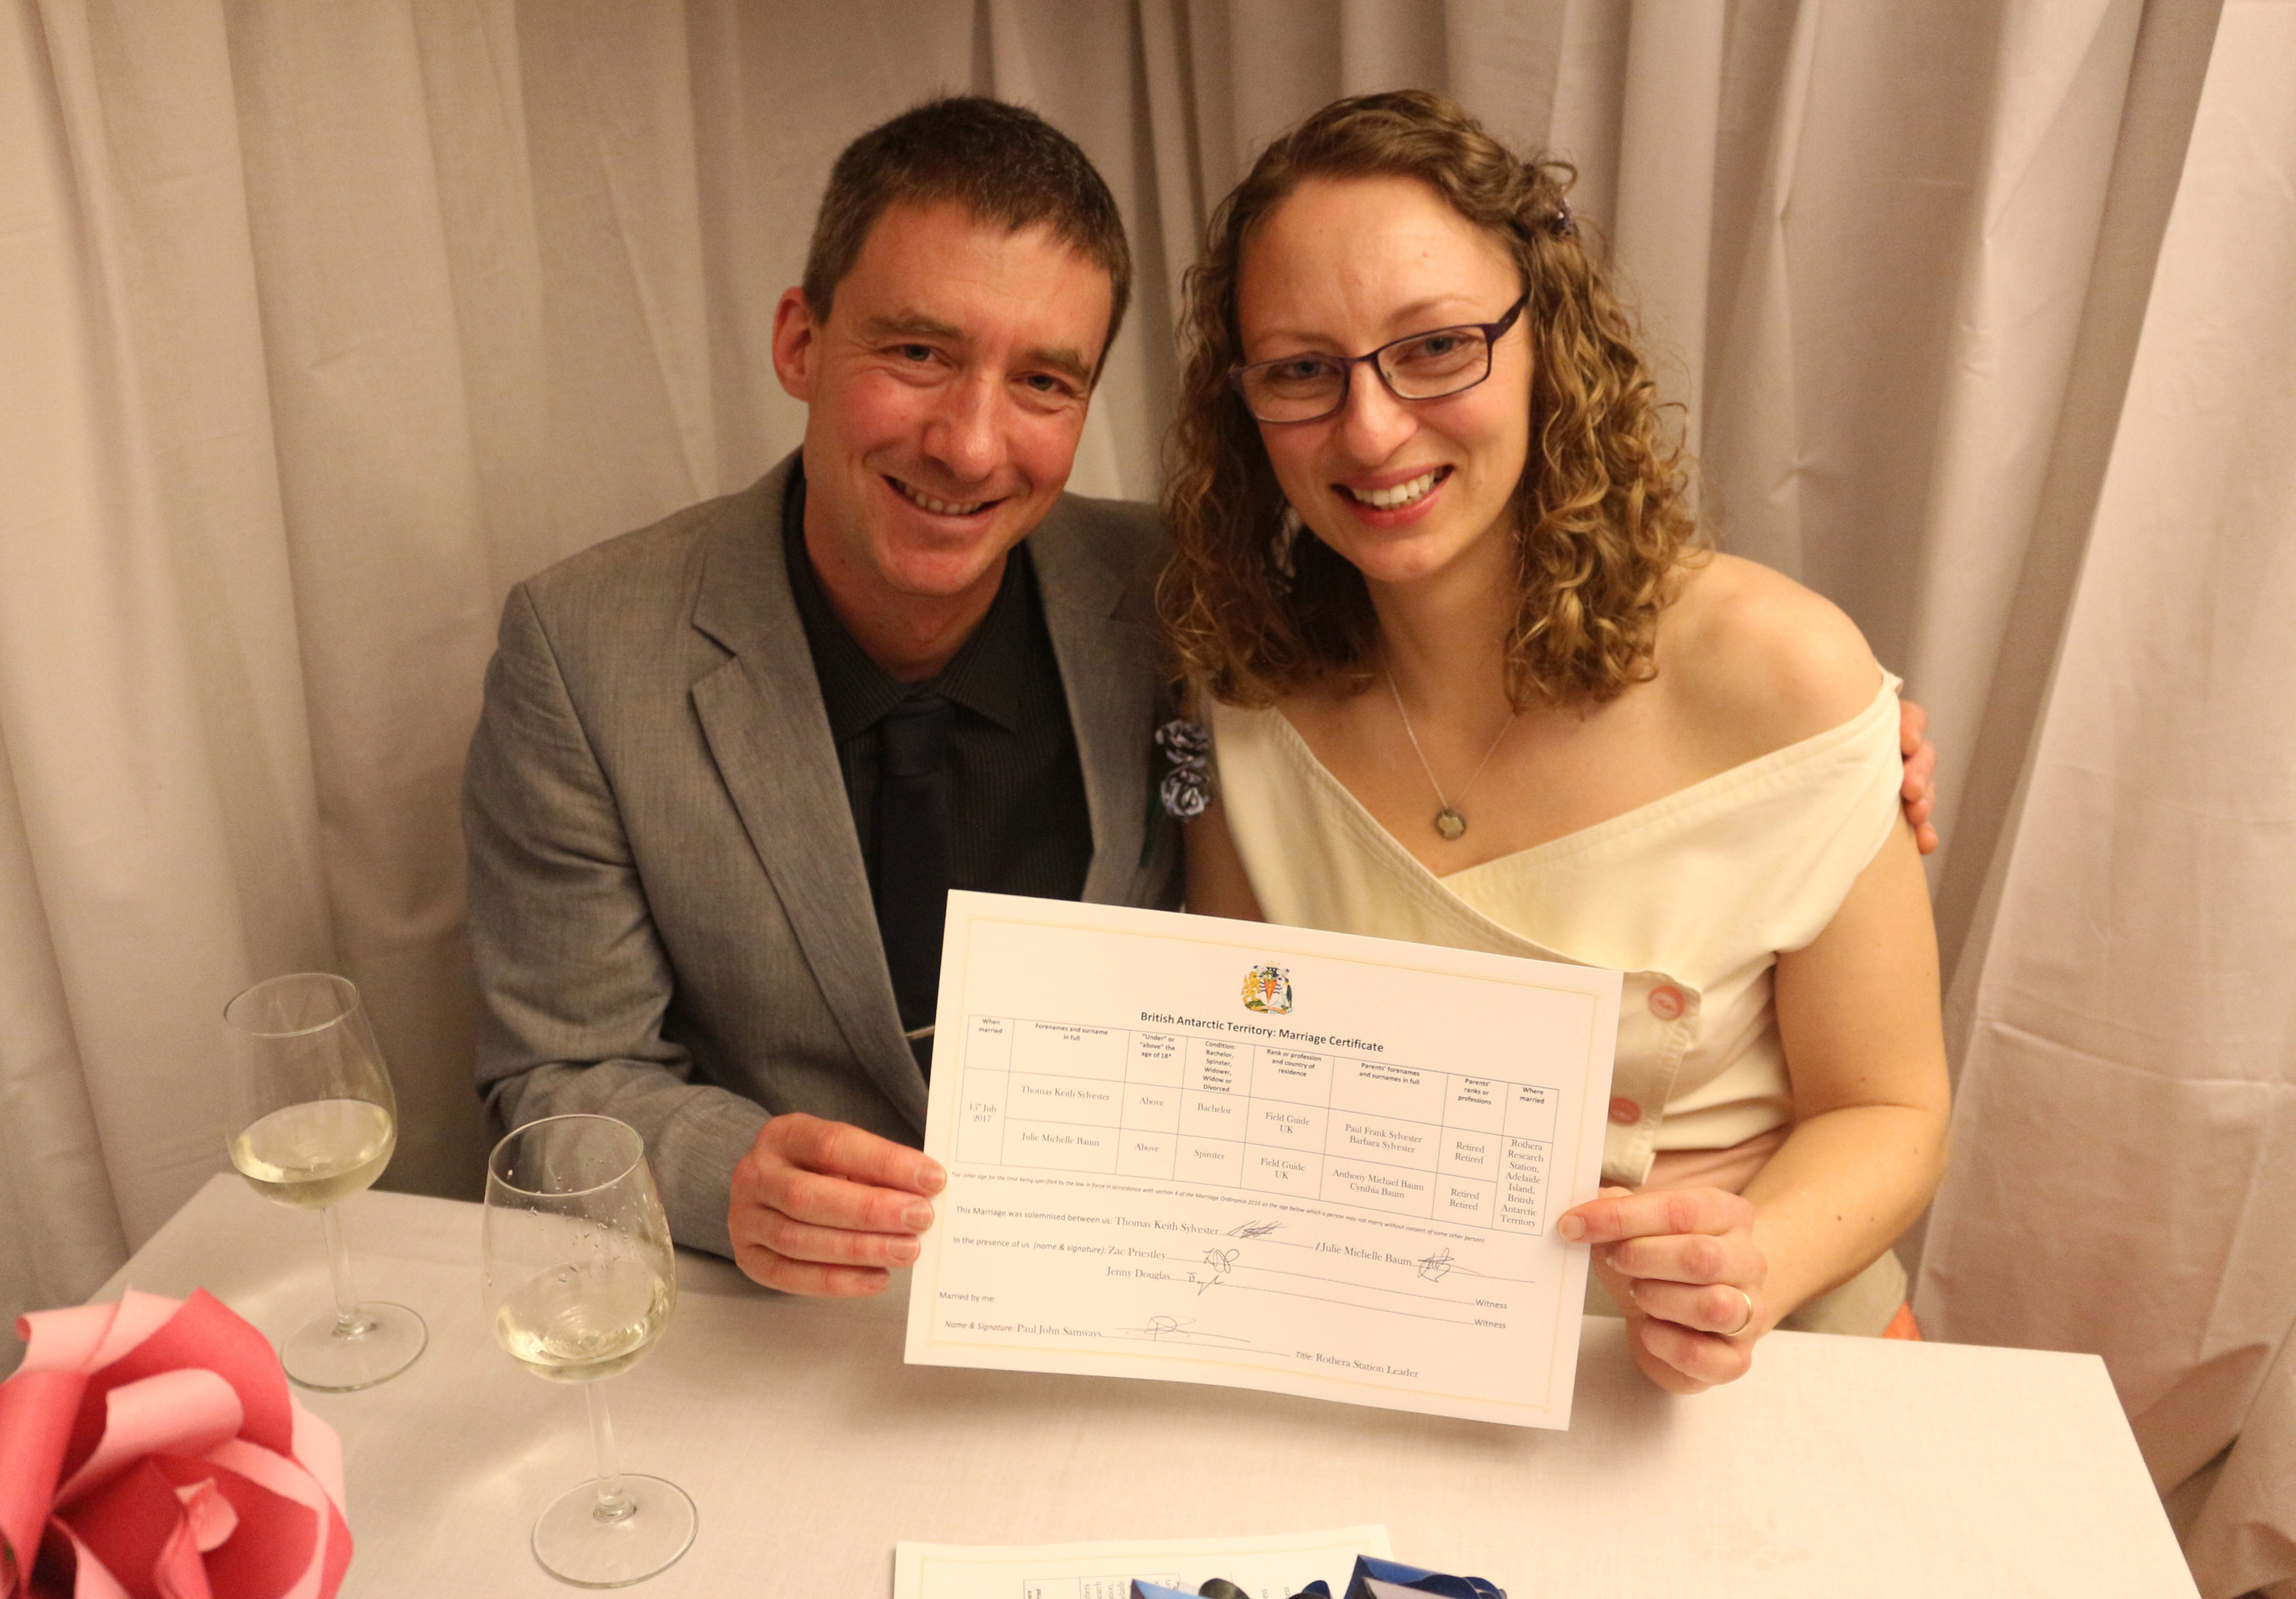 The couple with their certificate